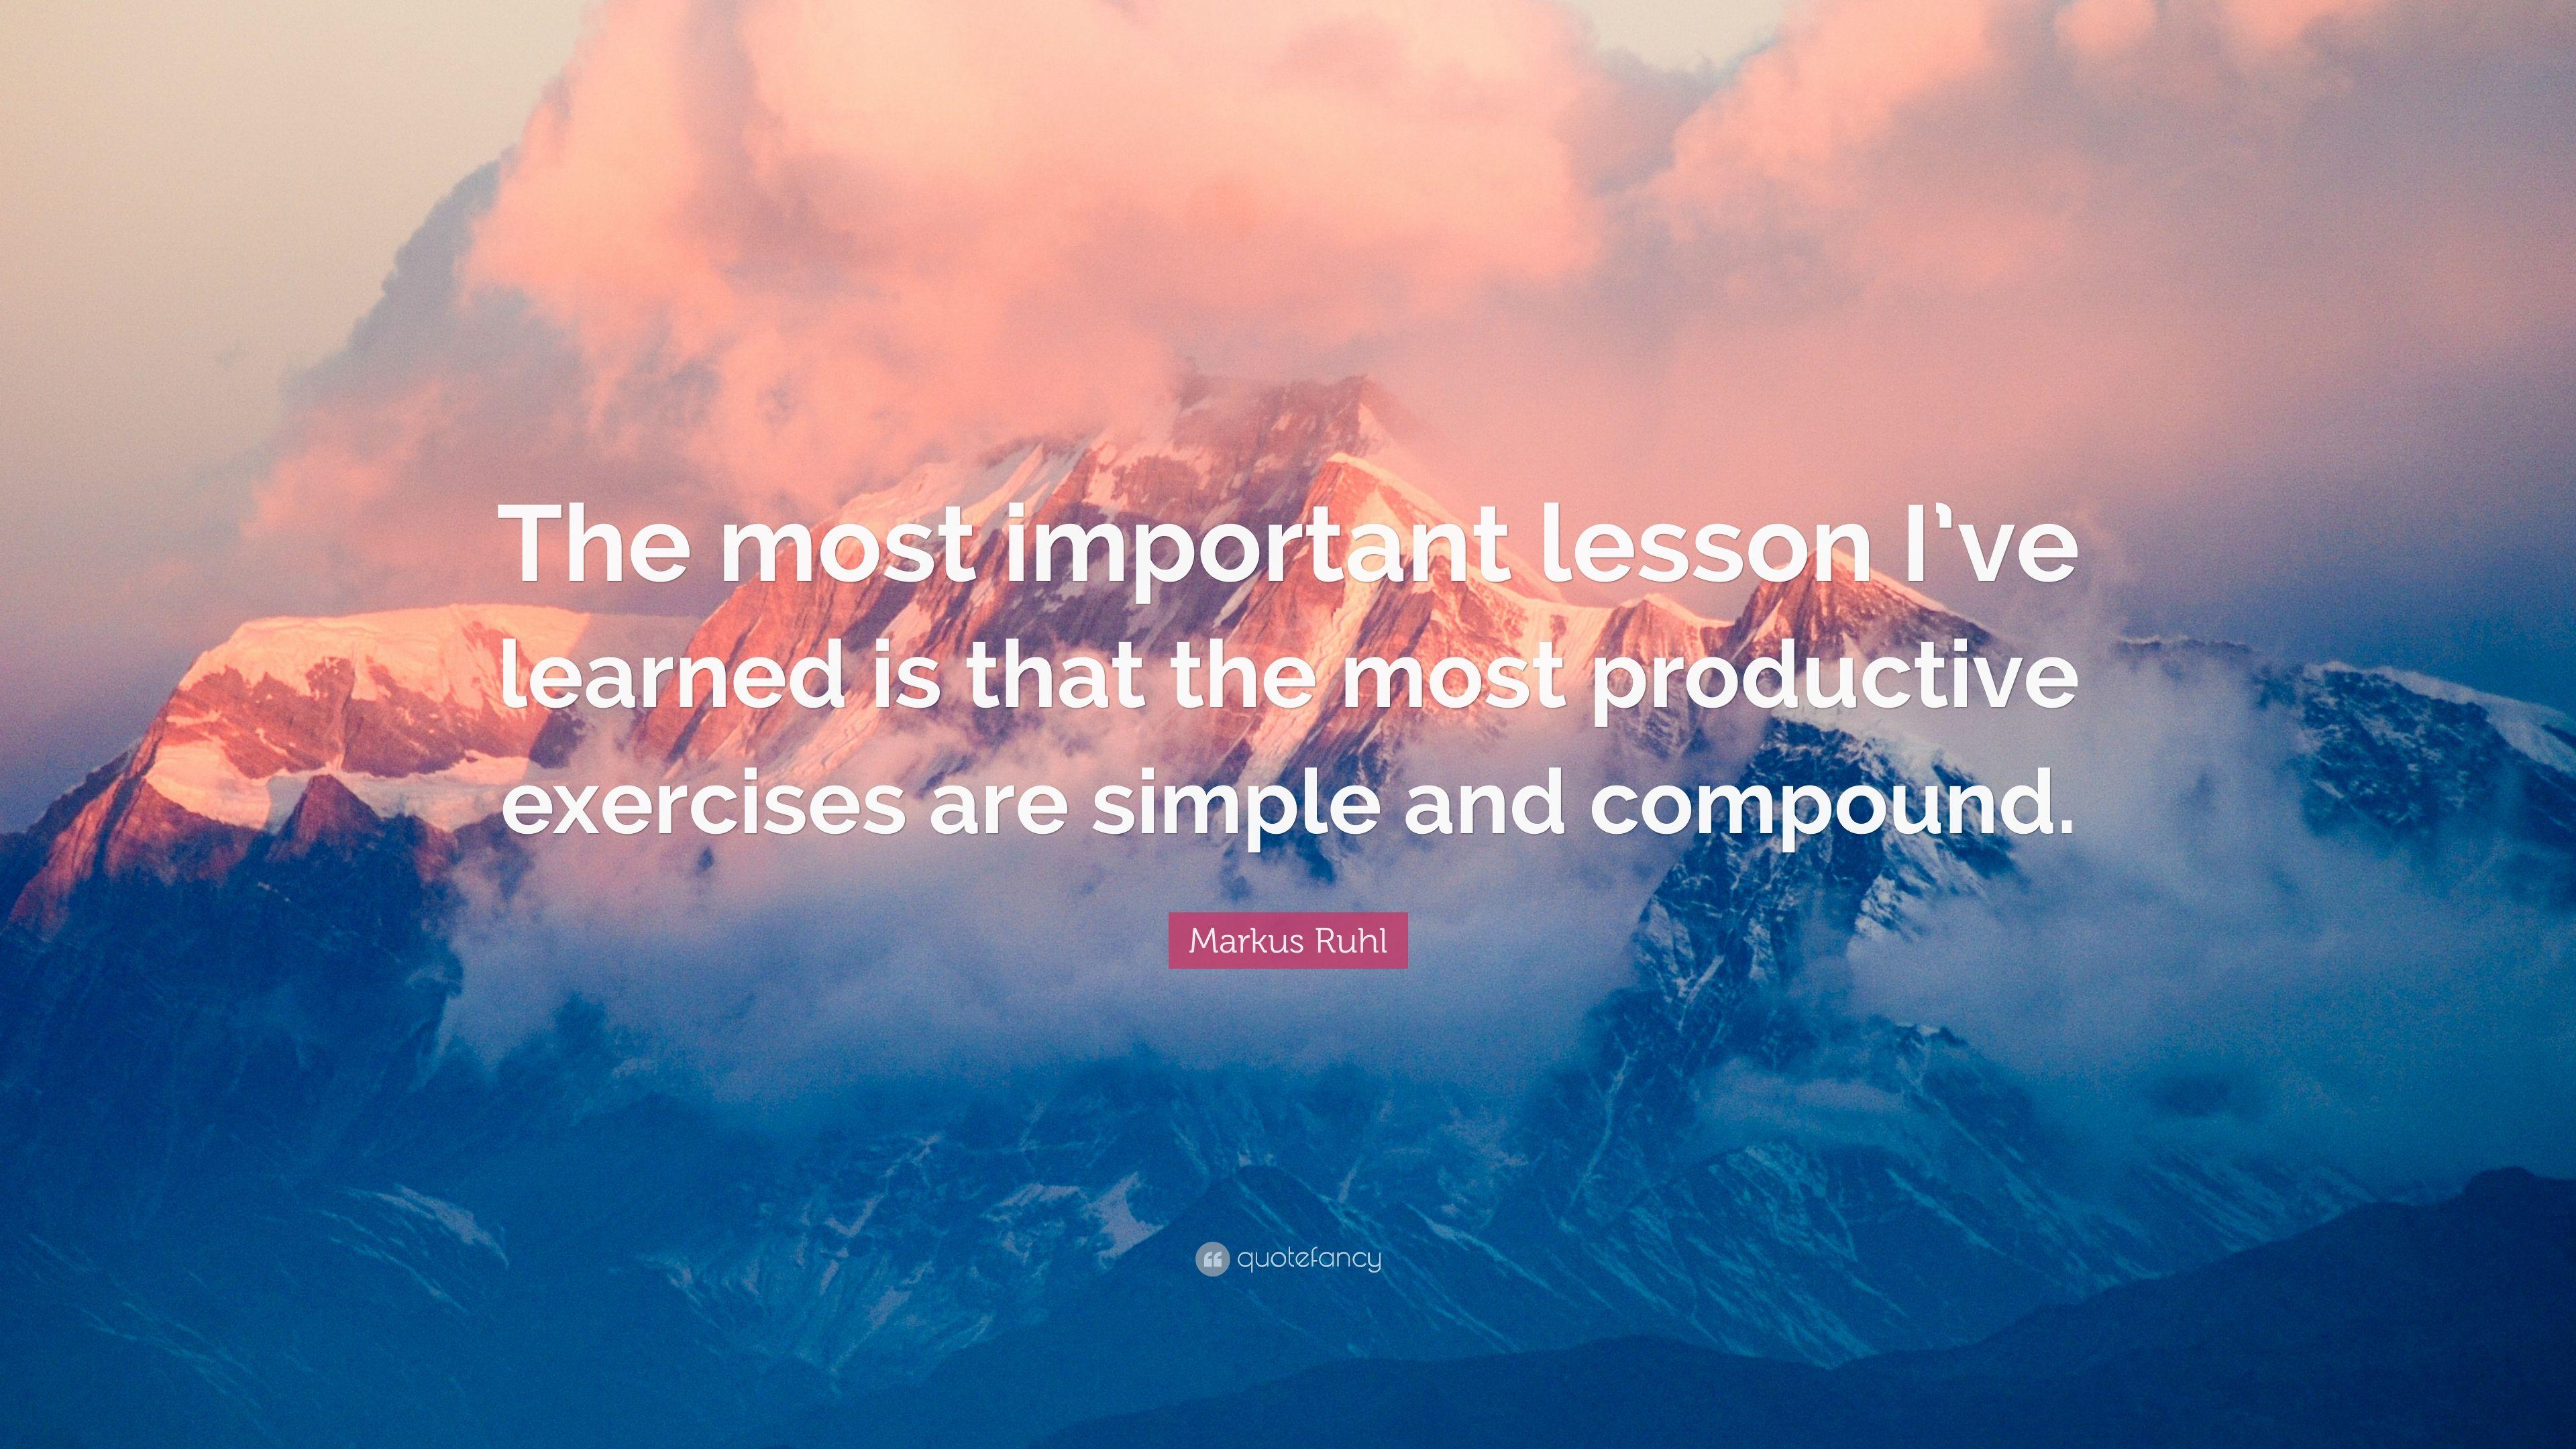 Markus Ruhl Quote: “The most important lesson I've learned